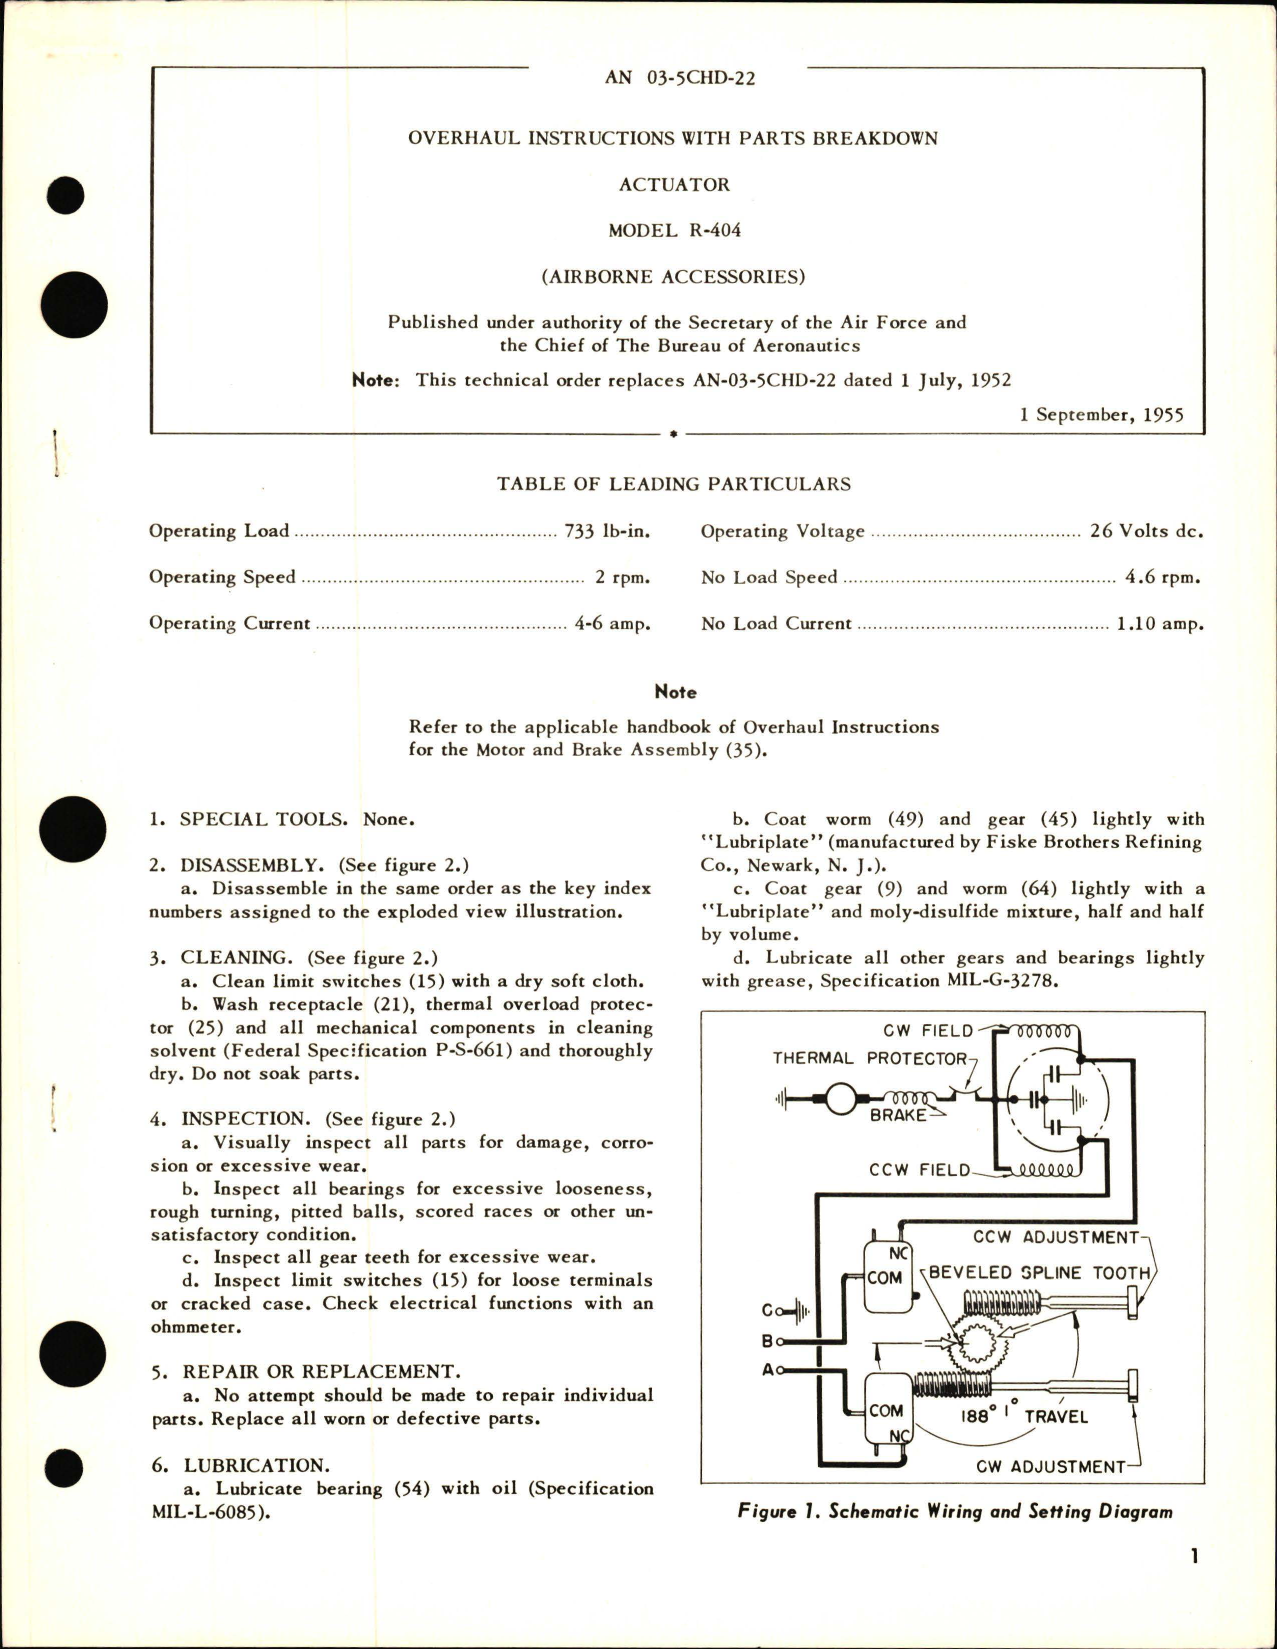 Sample page 1 from AirCorps Library document: Overhaul Instructions with Parts Breakdown for Actuator Model R-404